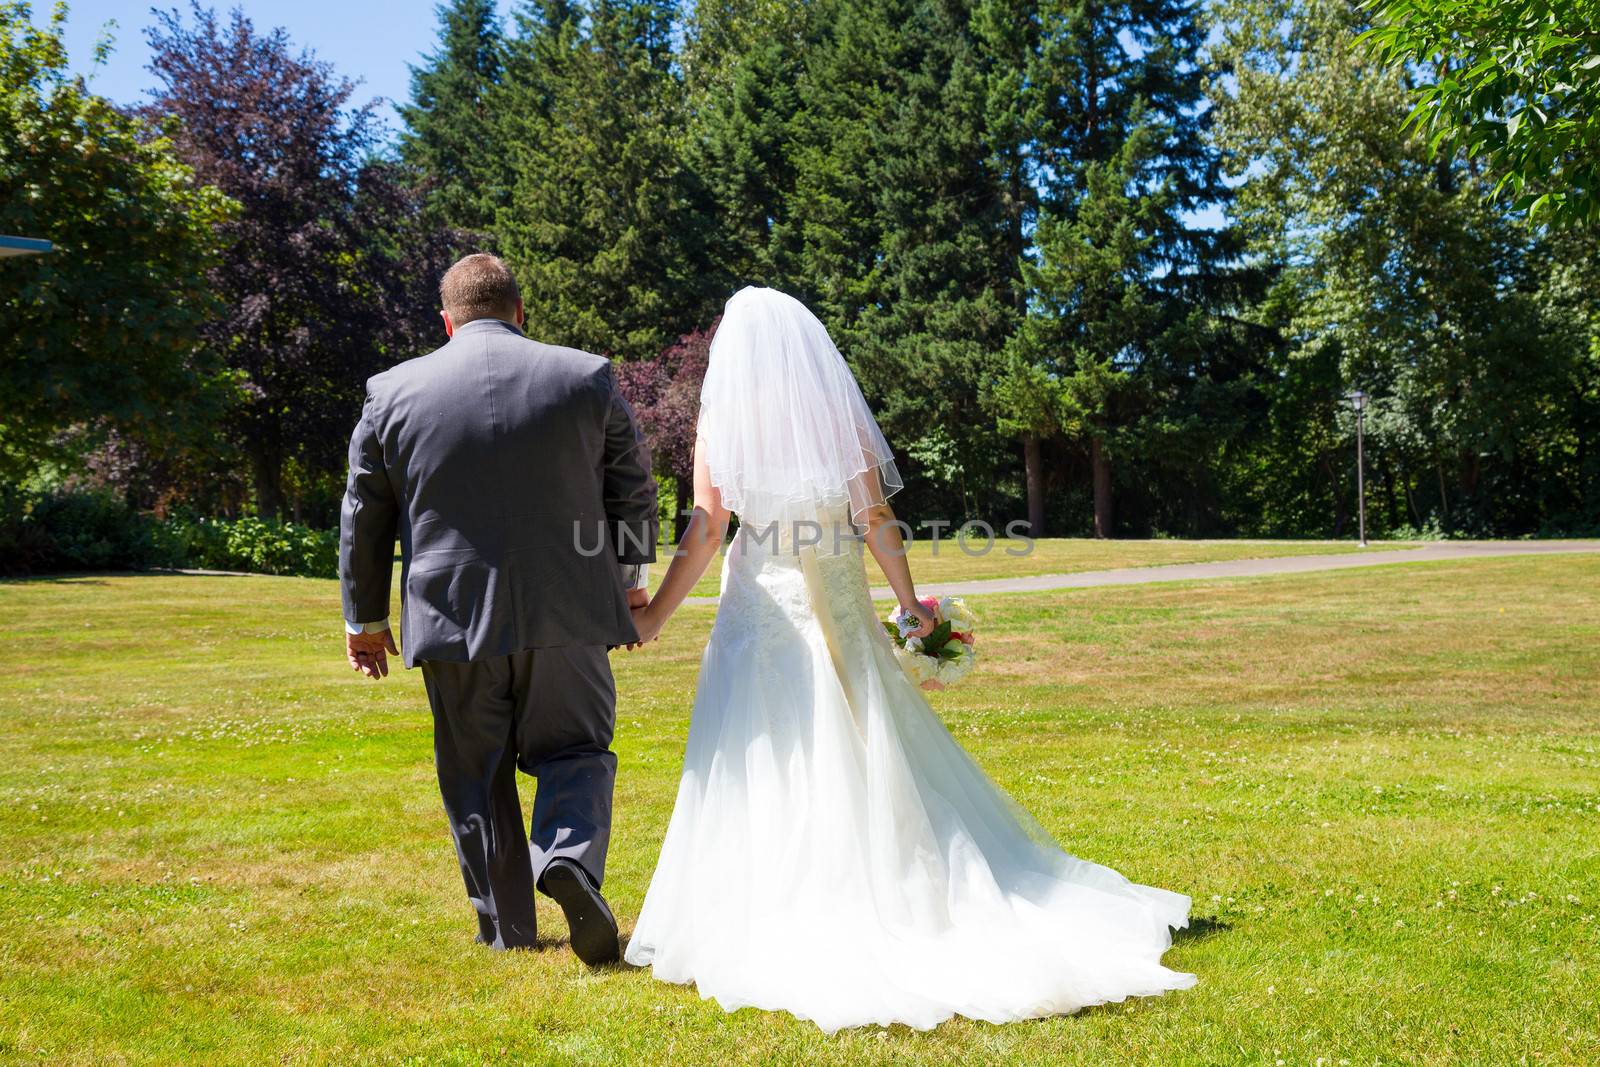 A bride and groom walk away from the camera holding hands at this outdoor wedding venue location in a park after just tying the knot.